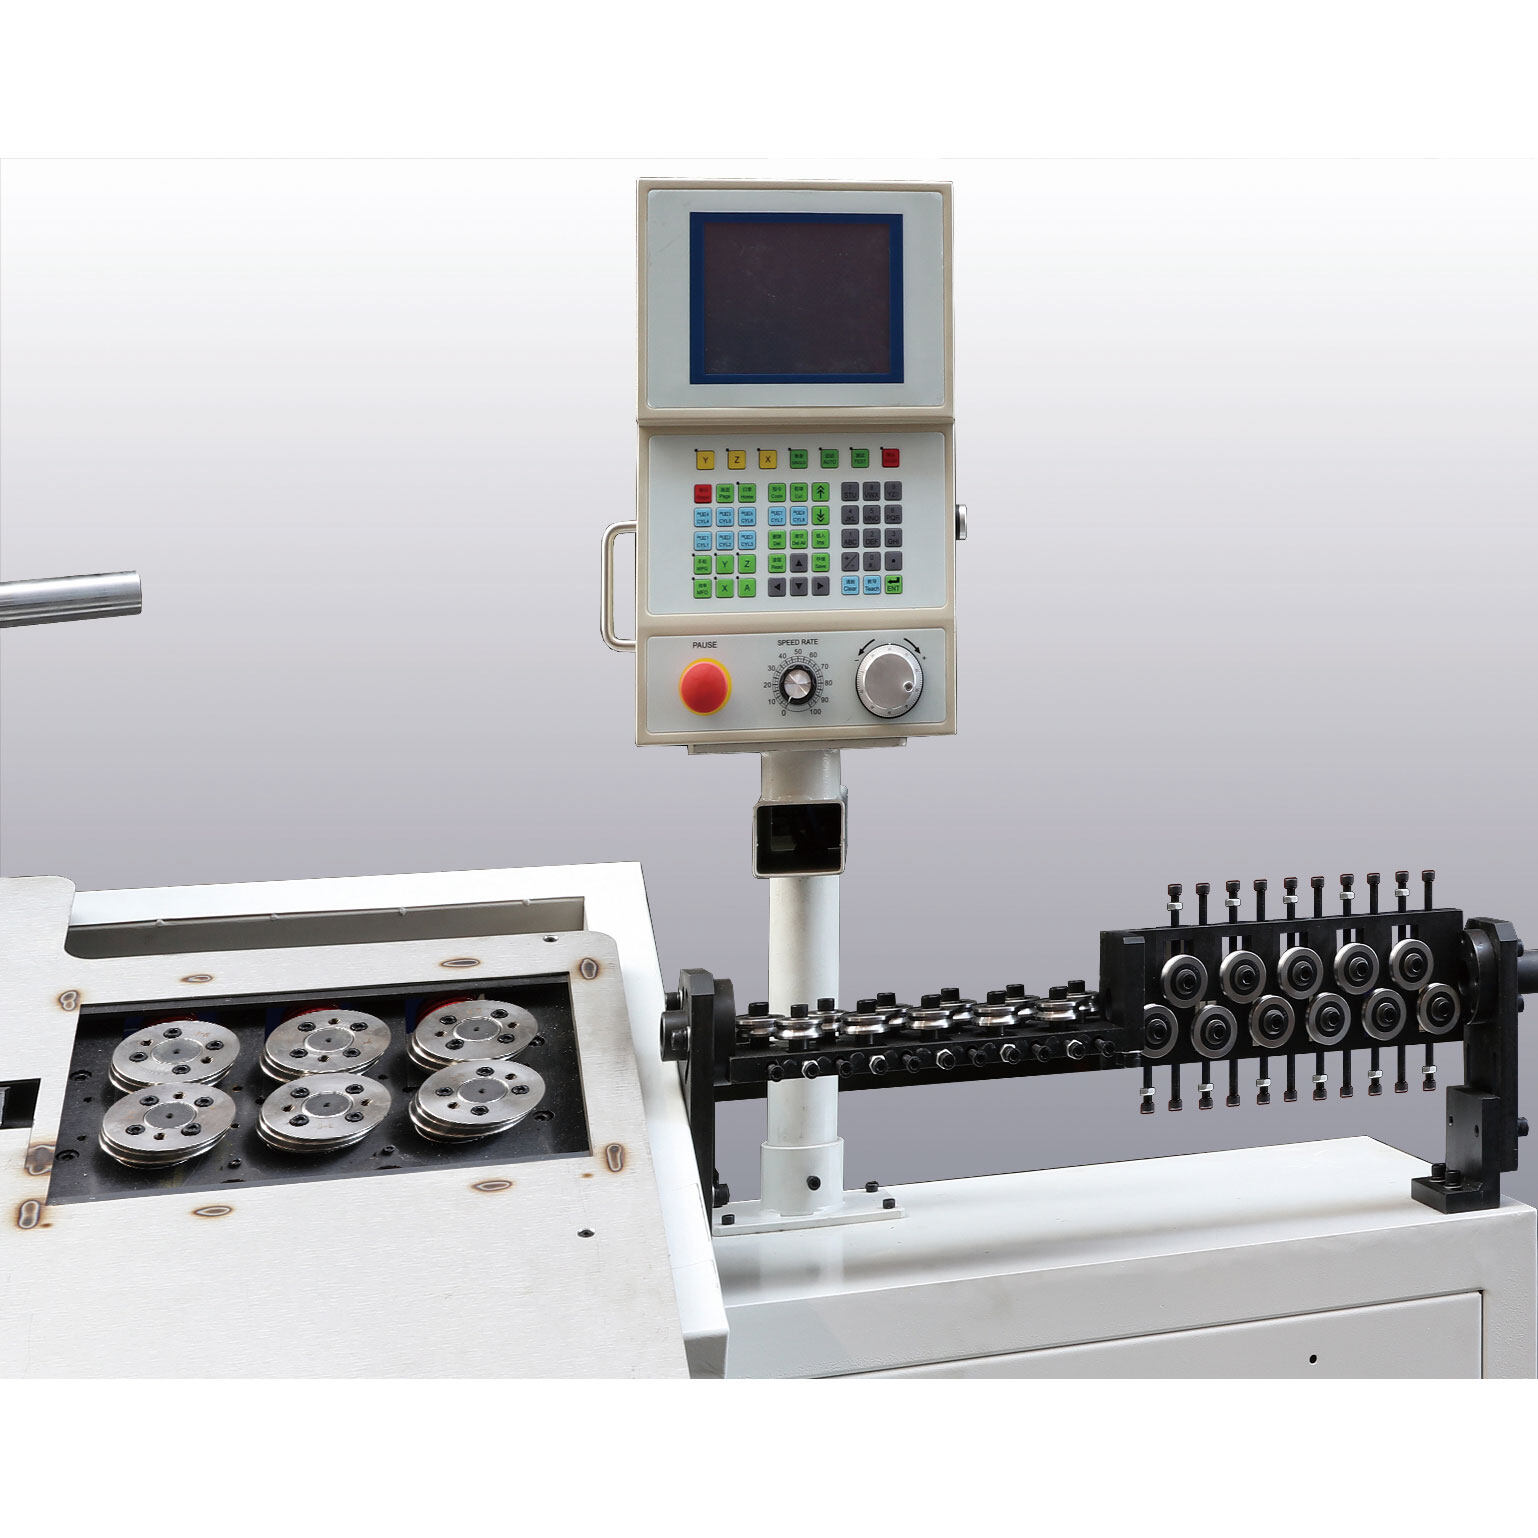 automated wire bending machine,bending wire machine factory,cnc wire bending machine manufacturer